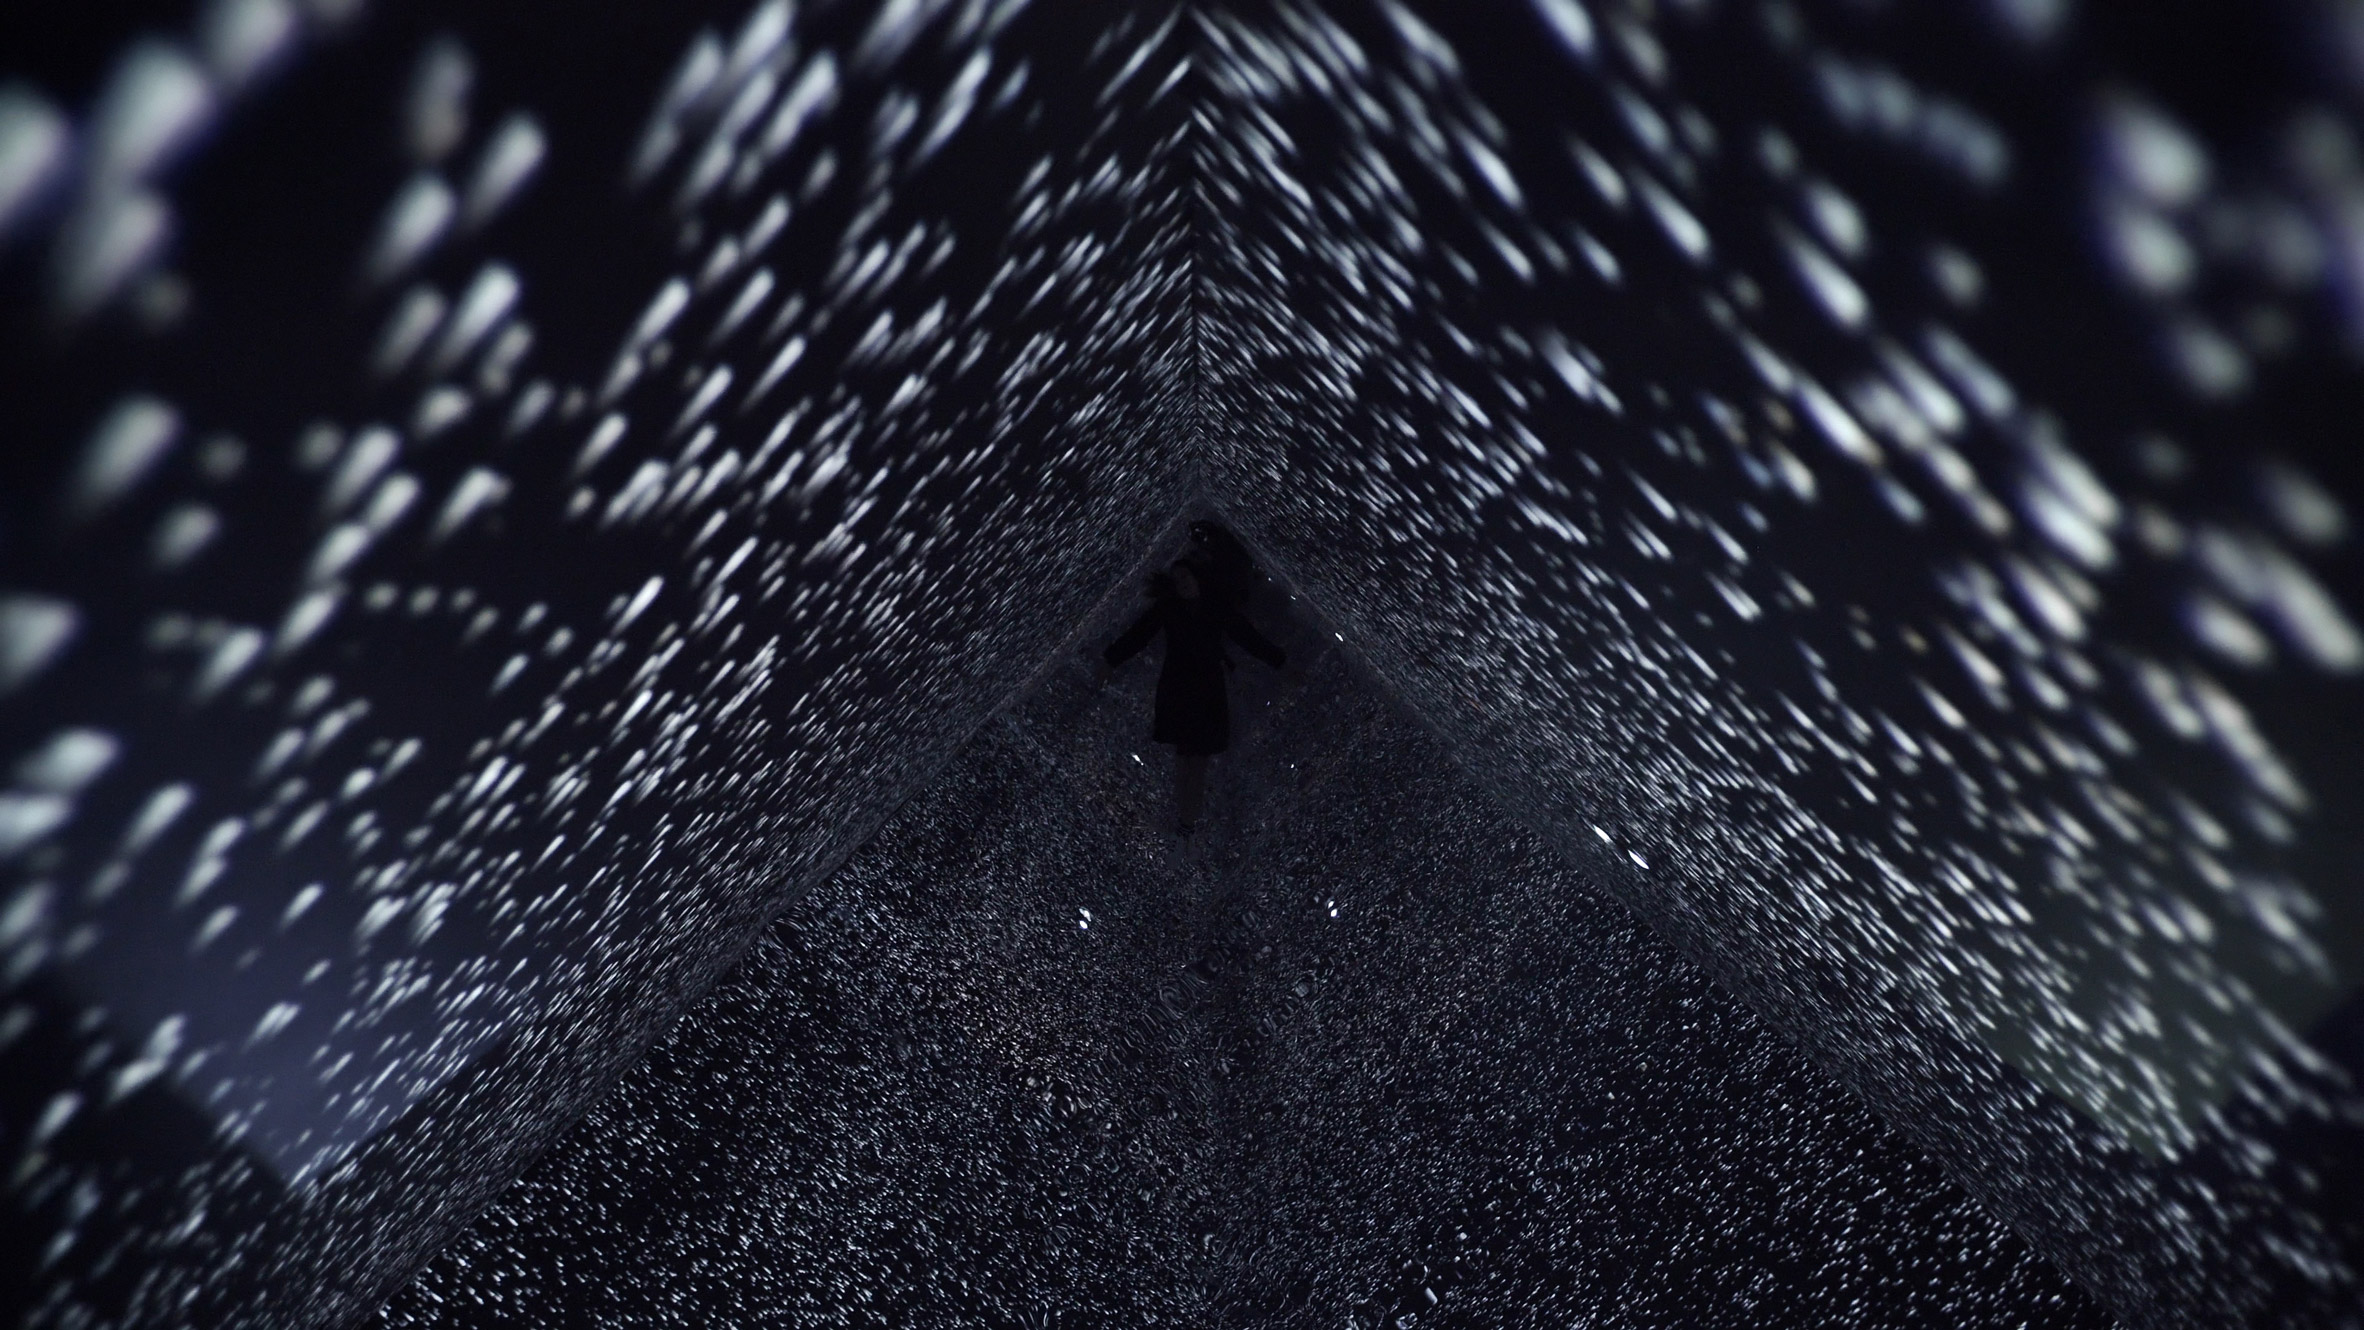 Refik Anadol's Infinity installation at SXSW immerses visitors in patterns of light